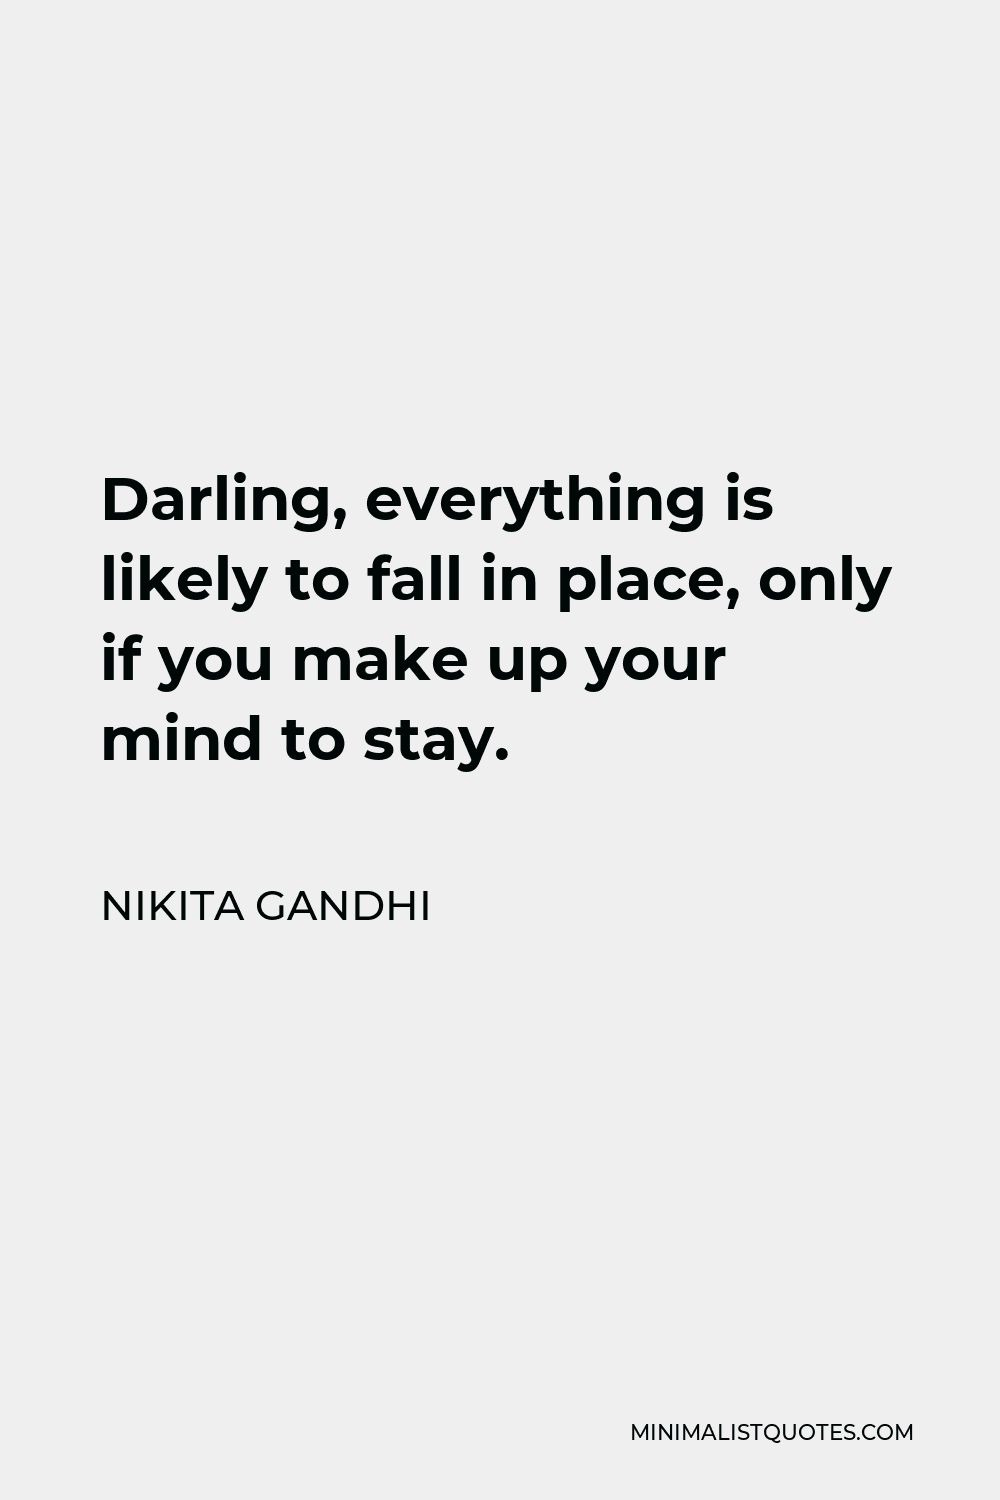 Nikita Gandhi Quote - Darling, everything is likely to fall in place, only if you make up your mind to stay.